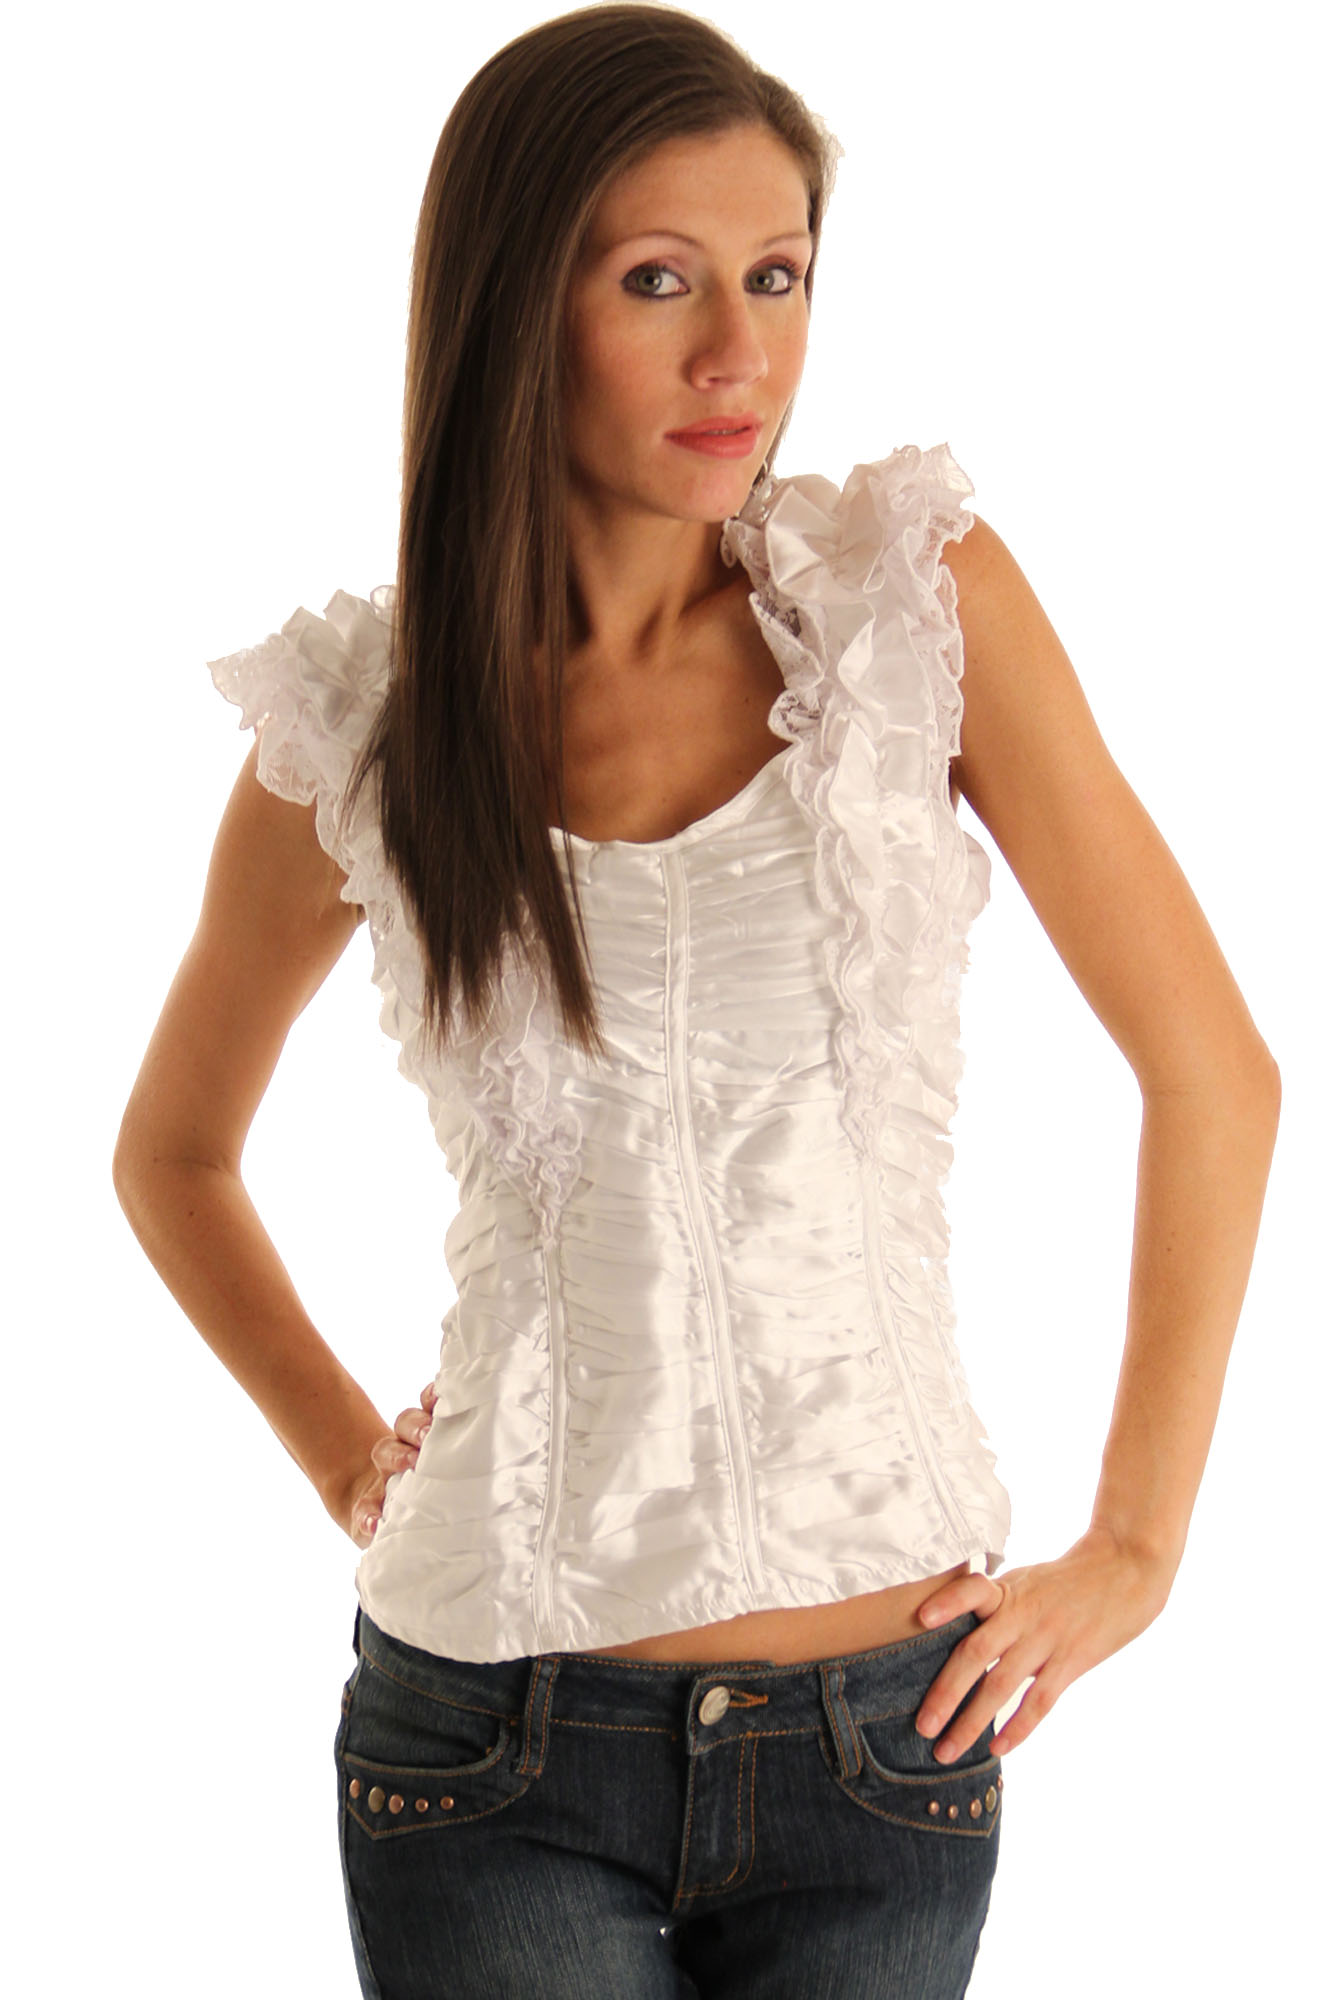 DHStyles.com DHStyles Women's White Romantic Ruffled Satin and Lace Top - Medium